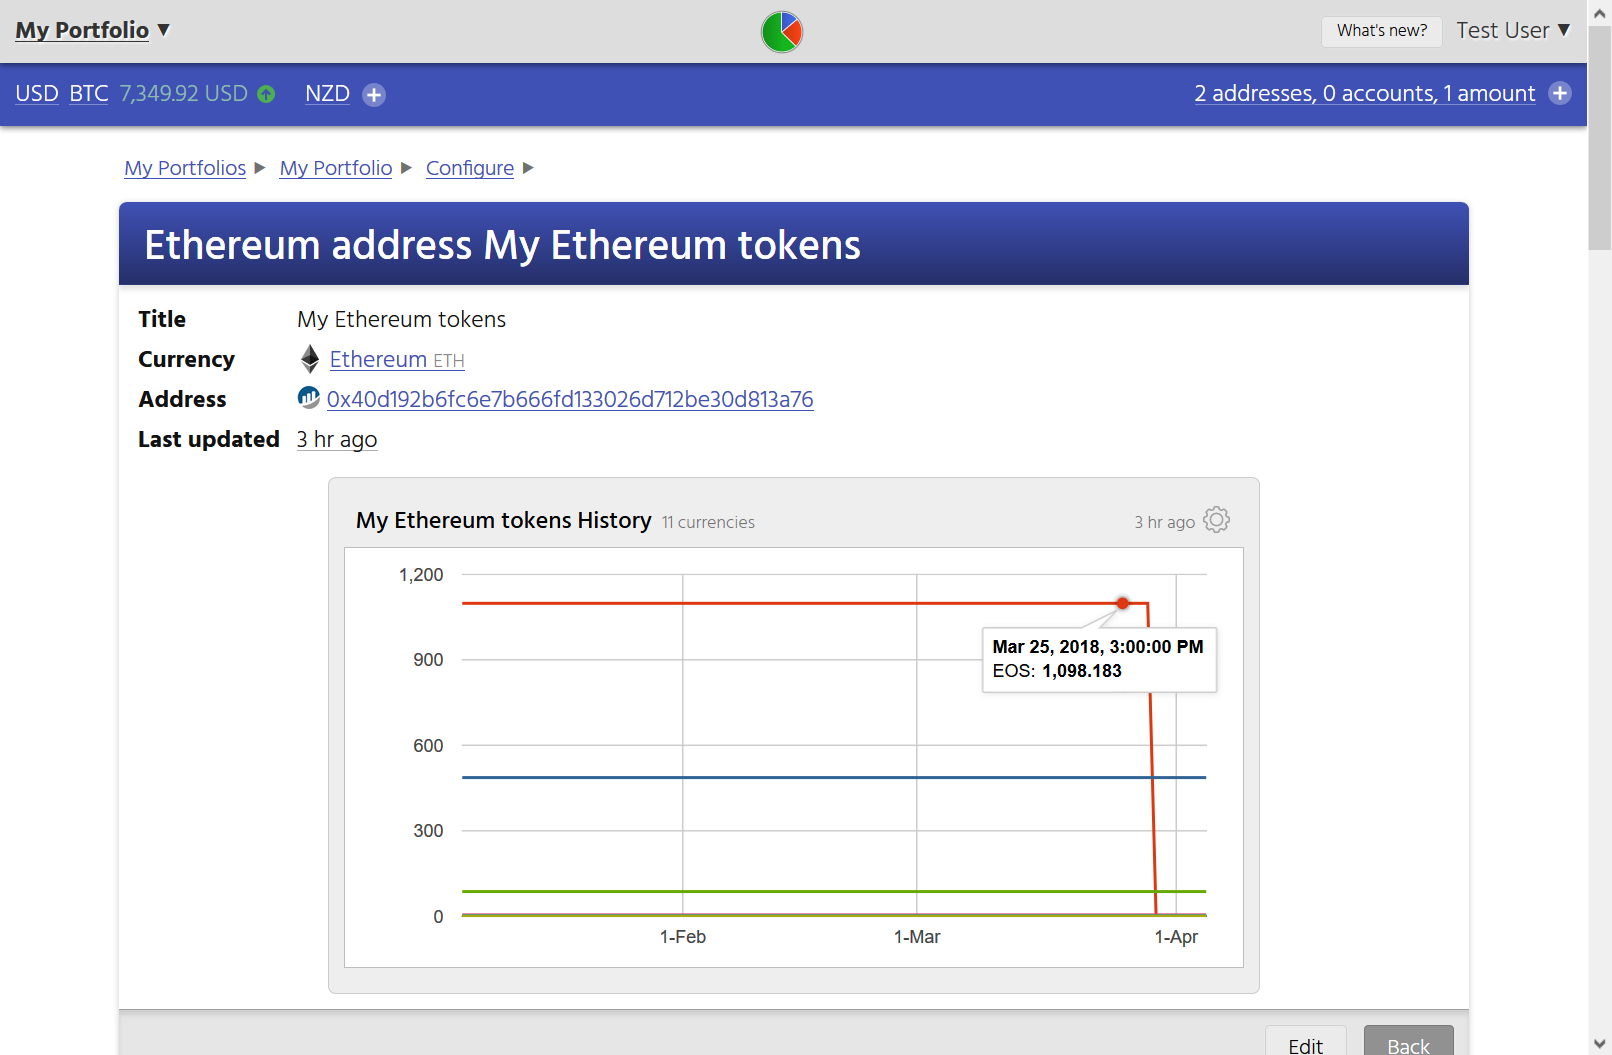 Screenshot showing that CryptFolio tracks the balances and transactions of tokens associated with an Ethereum address.